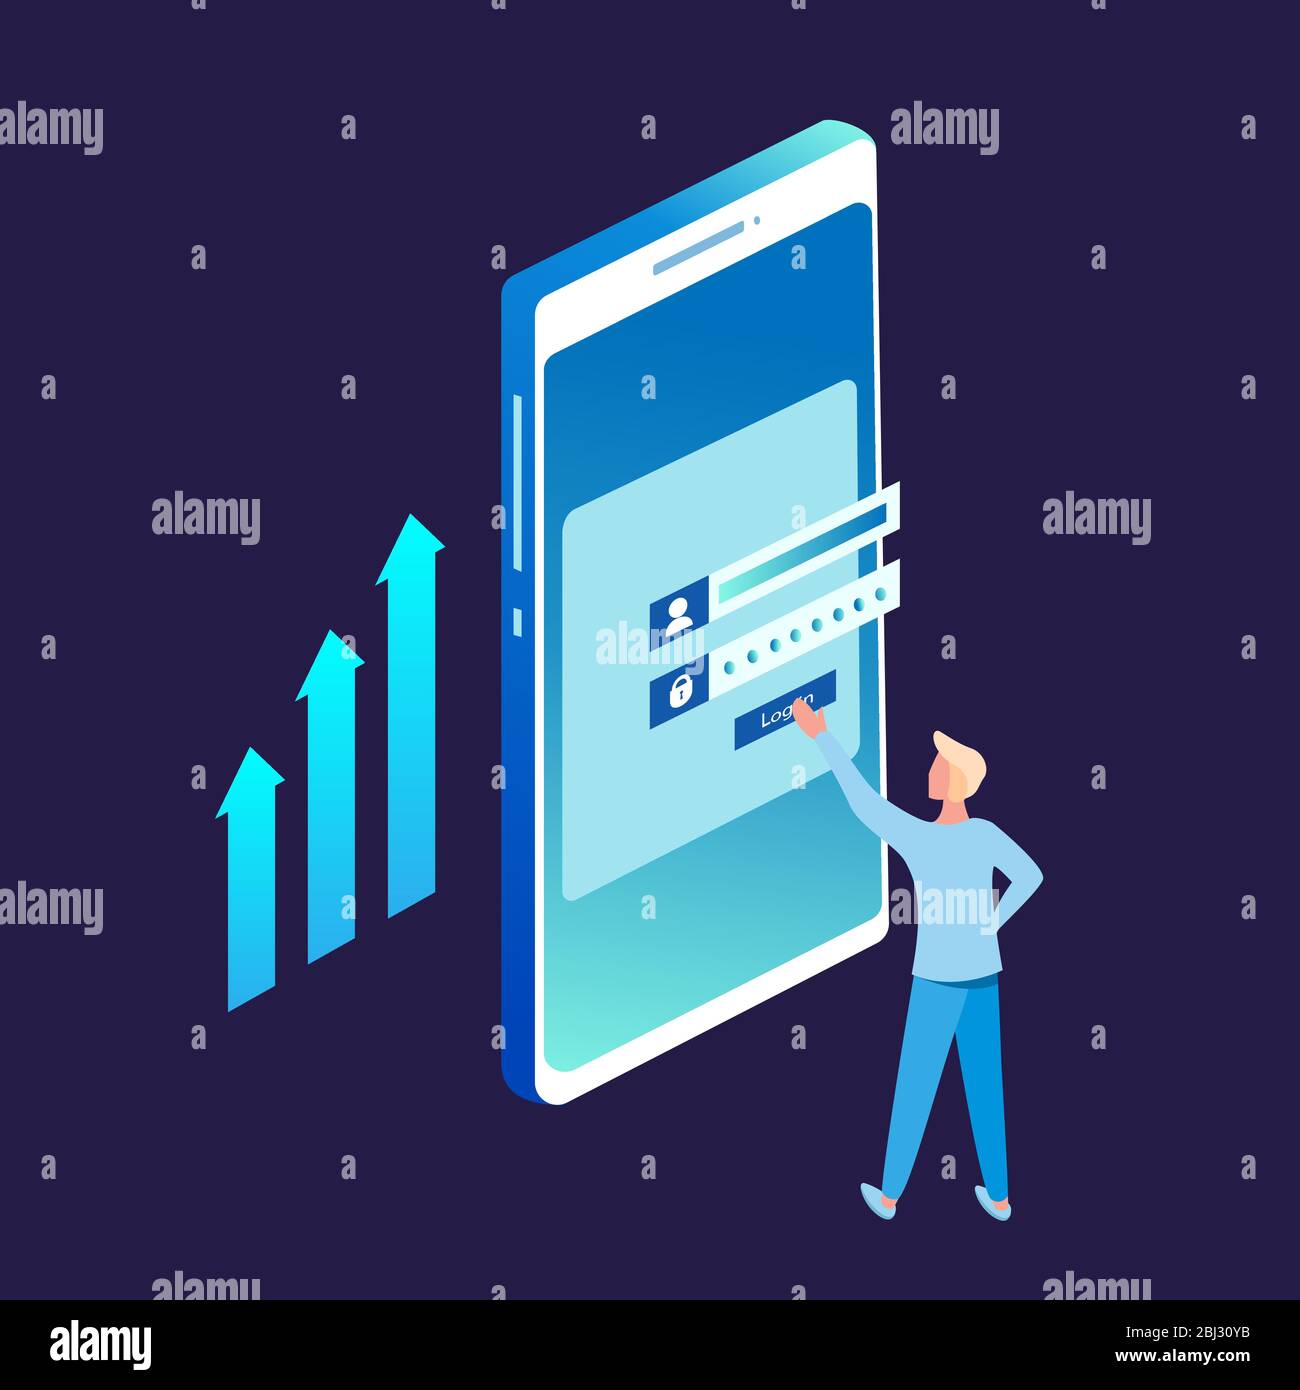 Registration form or login user interface. A man stands in front of inputted secured data. A big mobile screen is full of simple infographic elements. Stock Vector